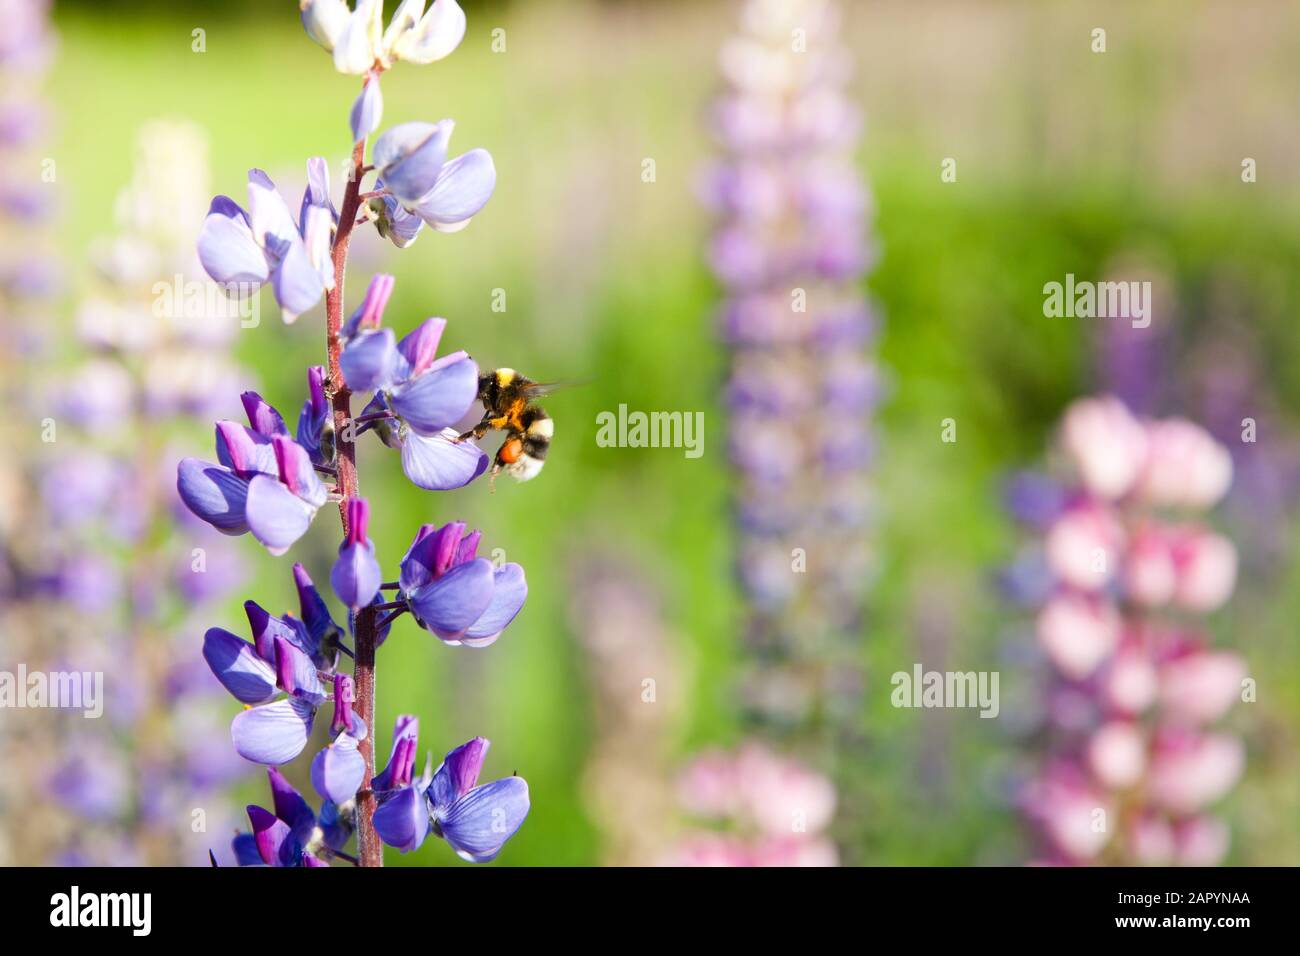 bumble bee flying around violet lupine blossoms. lupin and bumblebee. Landscape with wildflowers. Stock Photo